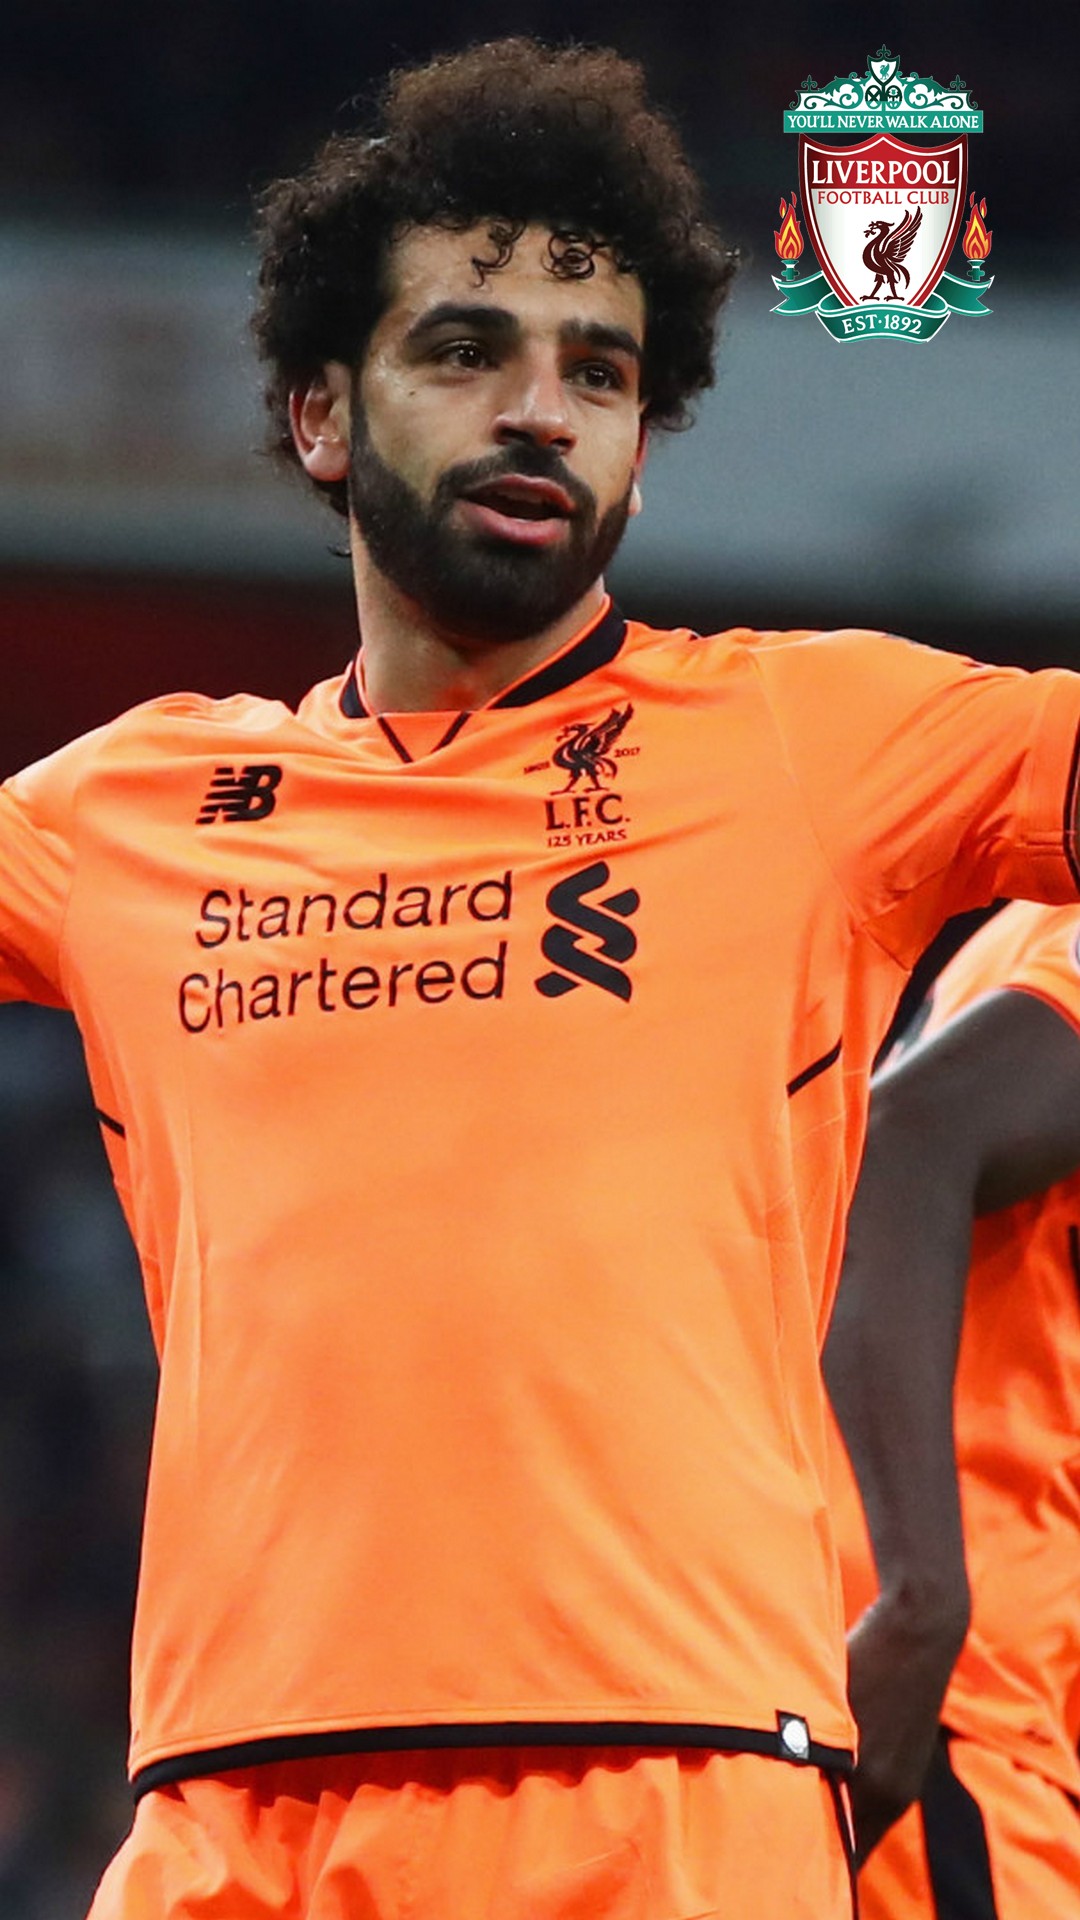 Wallpaper Liverpool Mohamed Salah Android with resolution 1080X1920 pixel. You can make this wallpaper for your Android backgrounds, Tablet, Smartphones Screensavers and Mobile Phone Lock Screen